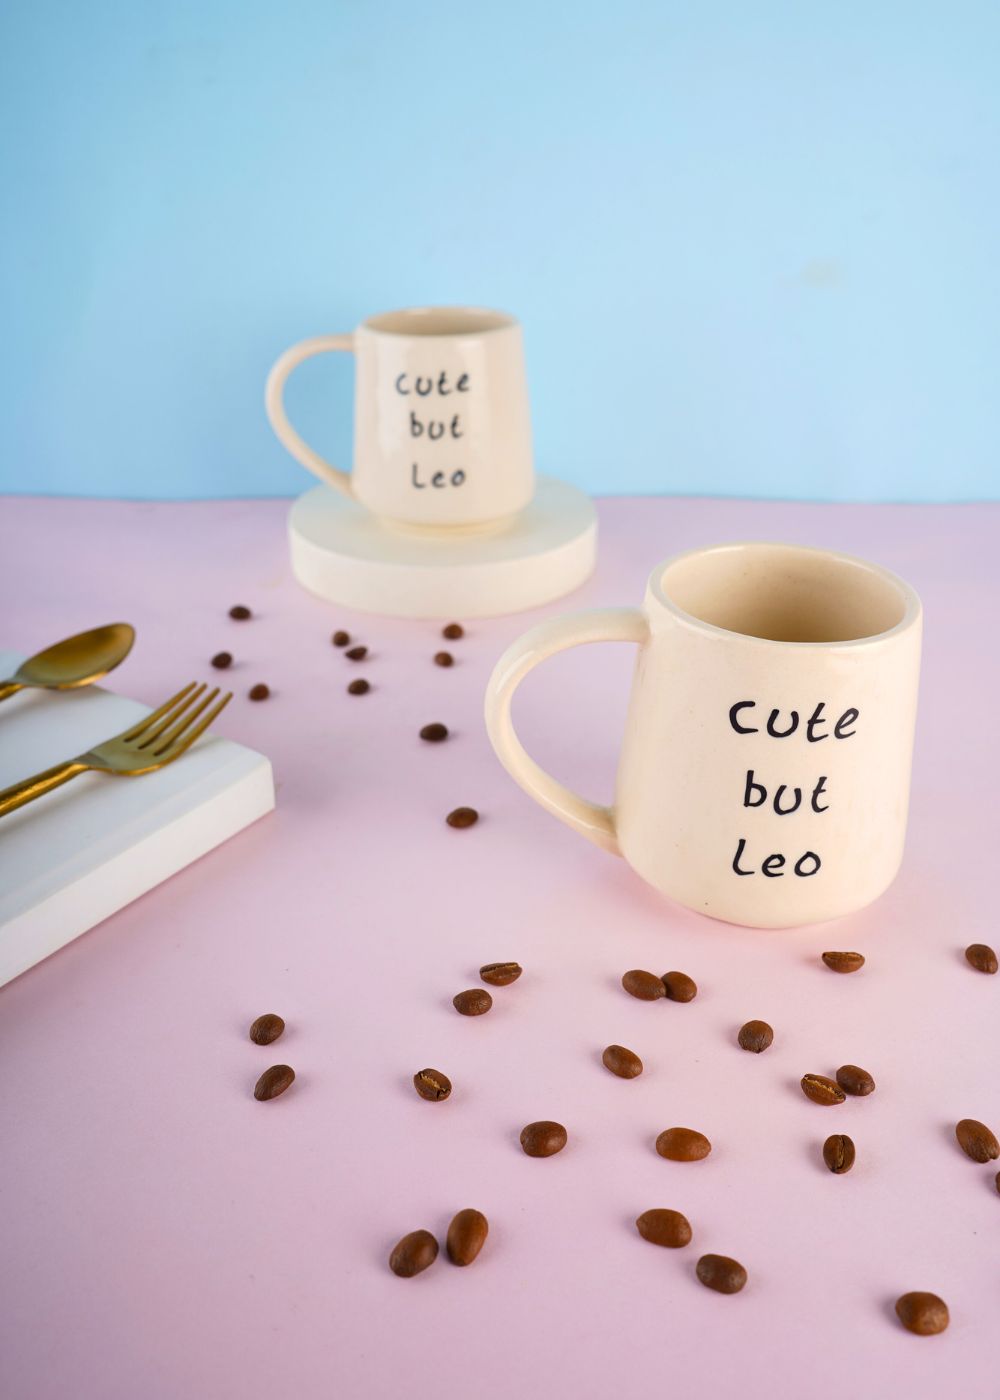 cute but leo mug with white color